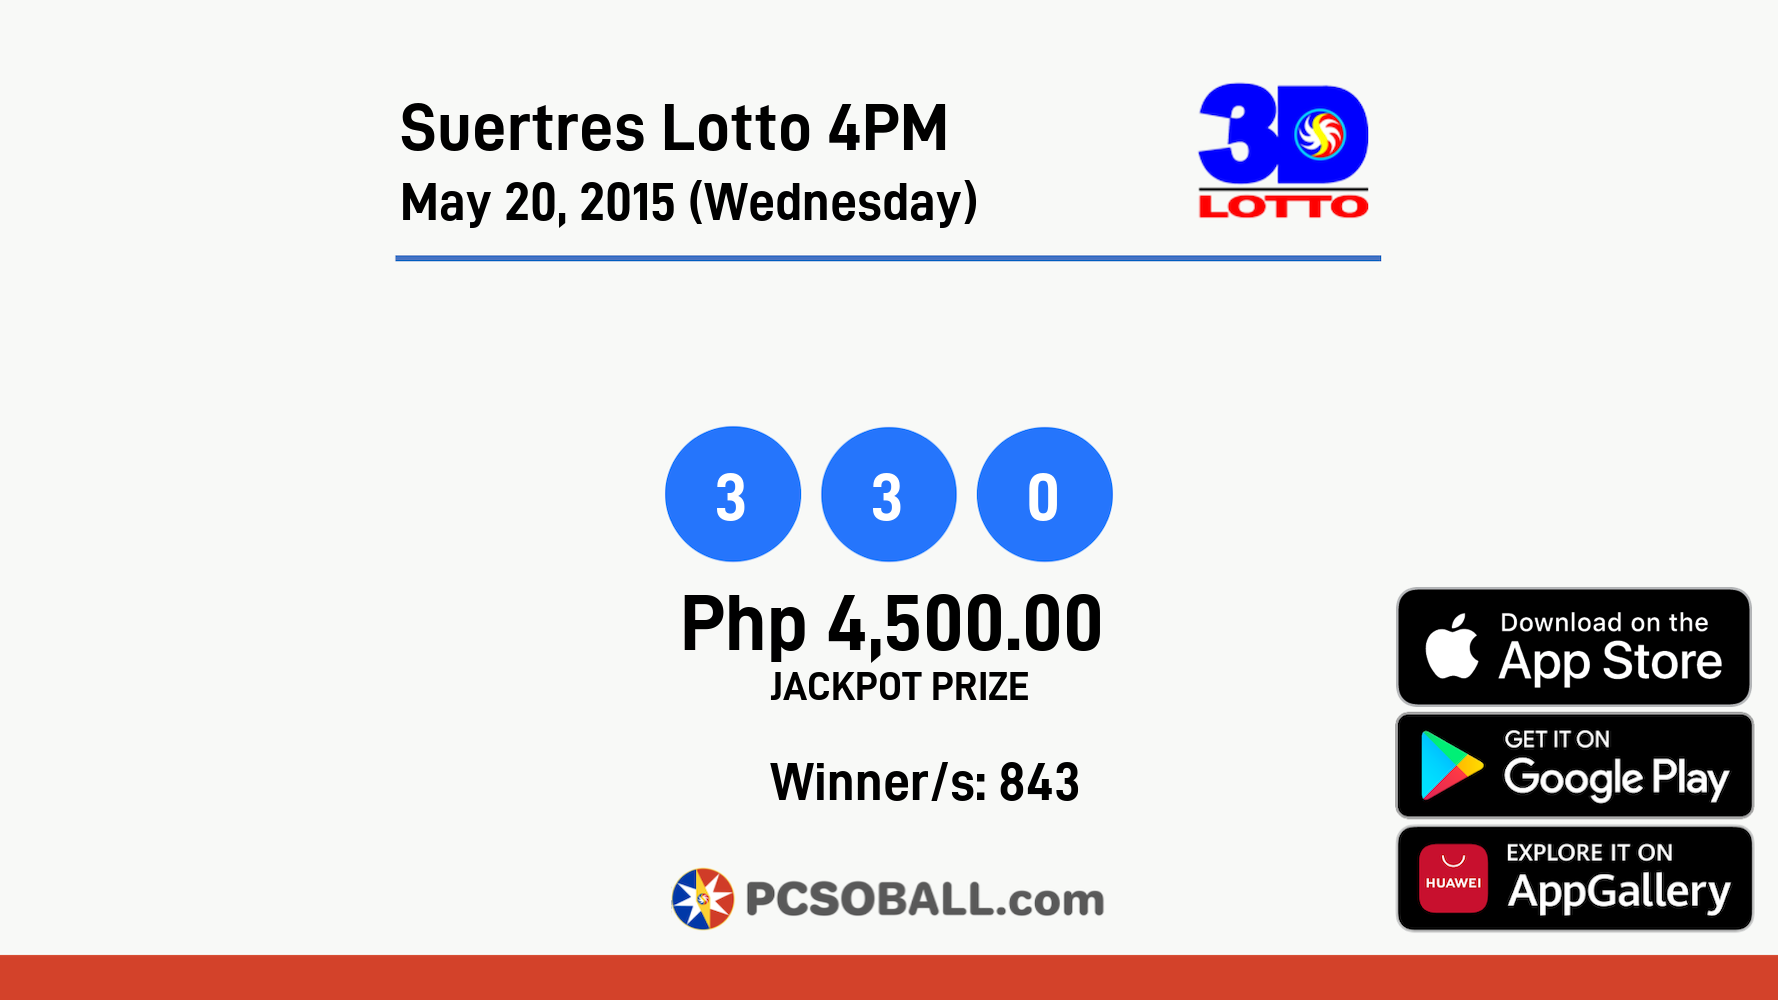 Suertres Lotto 4PM May 20, 2015 (Wednesday) Result